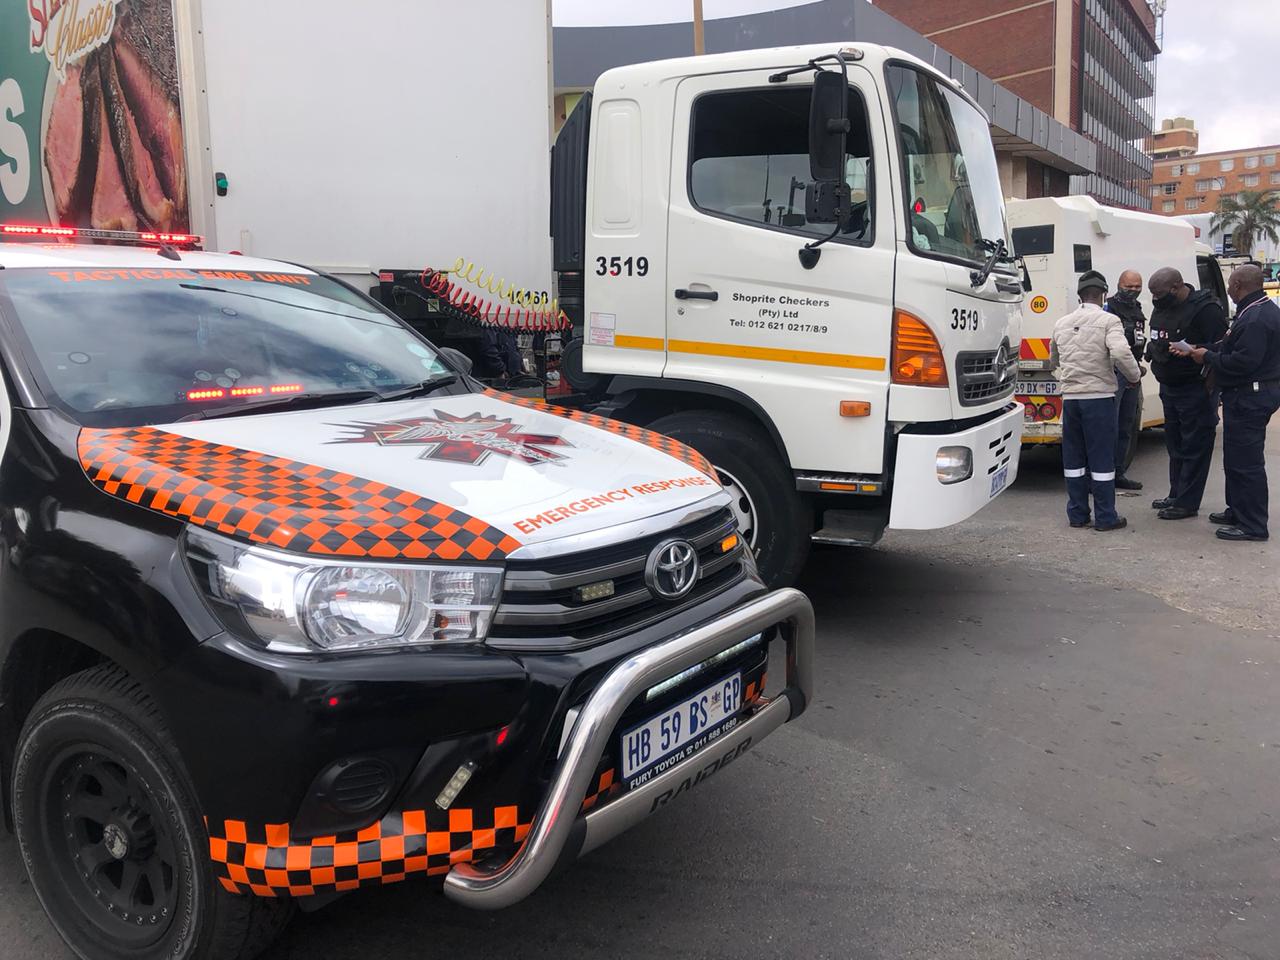 Emer-G-Med responded to a cash-in-transit robbery in Kempton Park